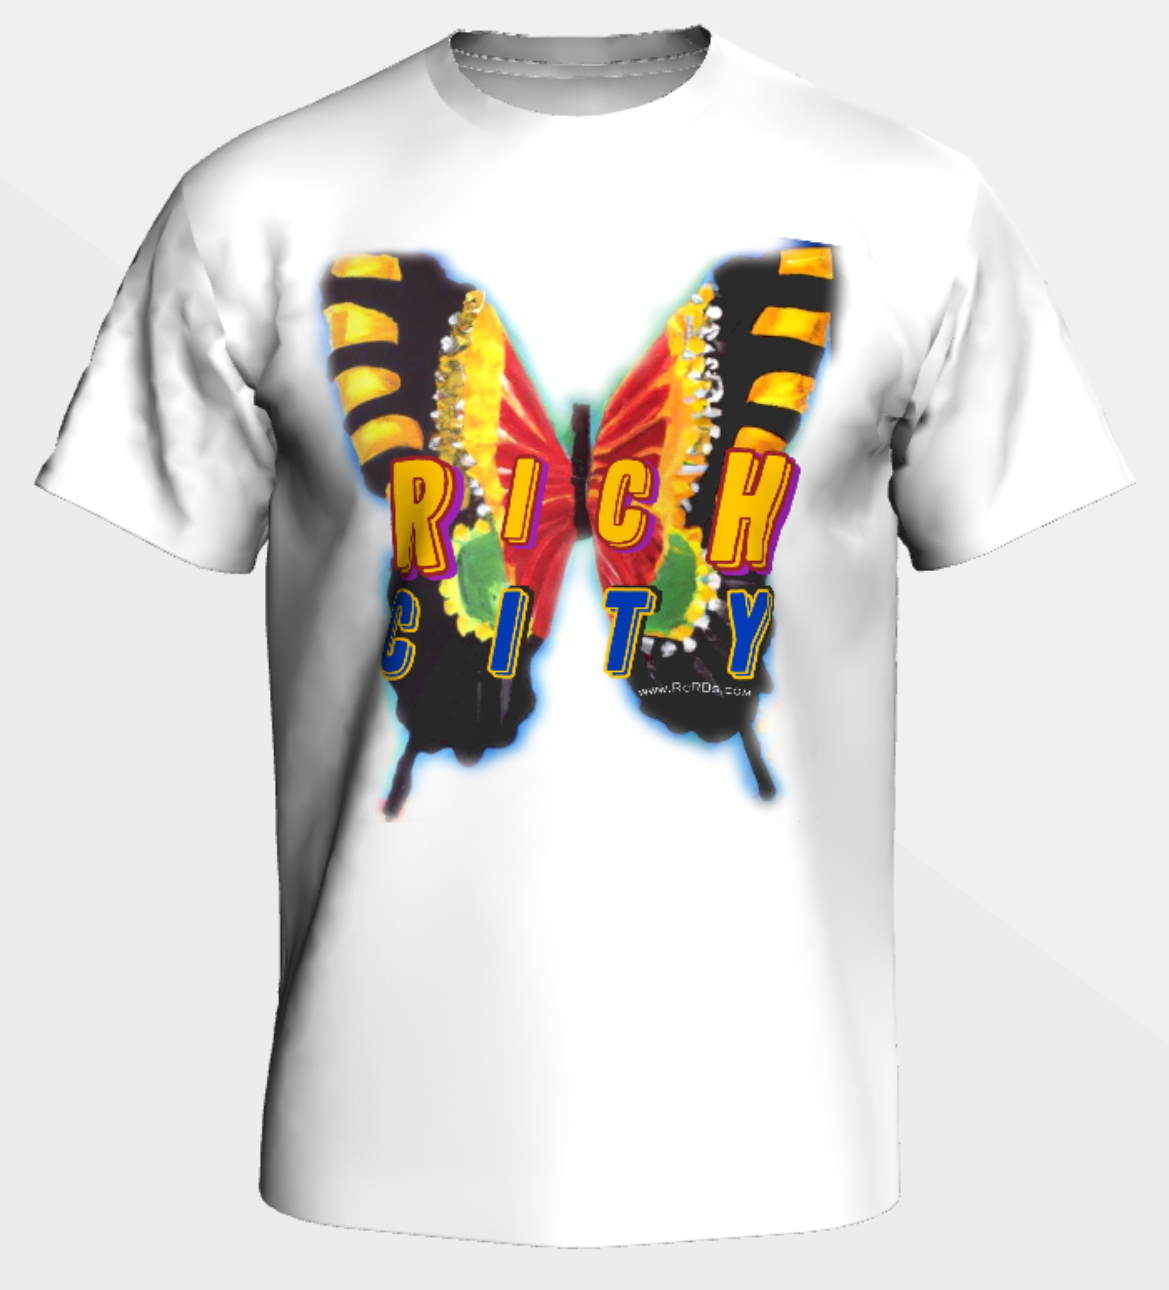 "Evry1's Brand" RichCity -"The Butterfly Effect"- #5 Sustainable Clothing Collection